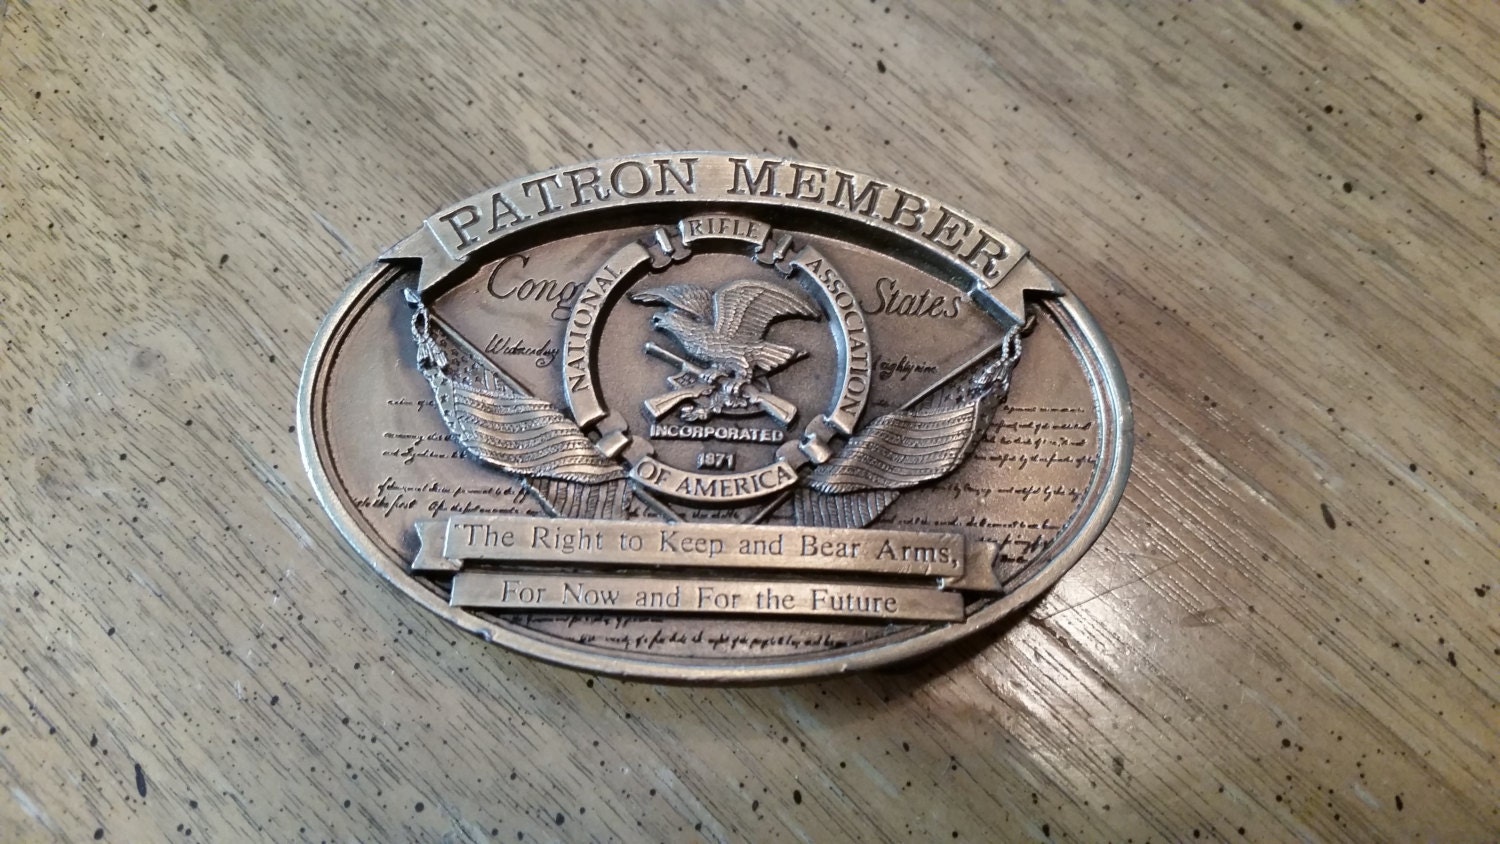 Vintage NRA Patron Member Belt Buckle Oval Made in the USA